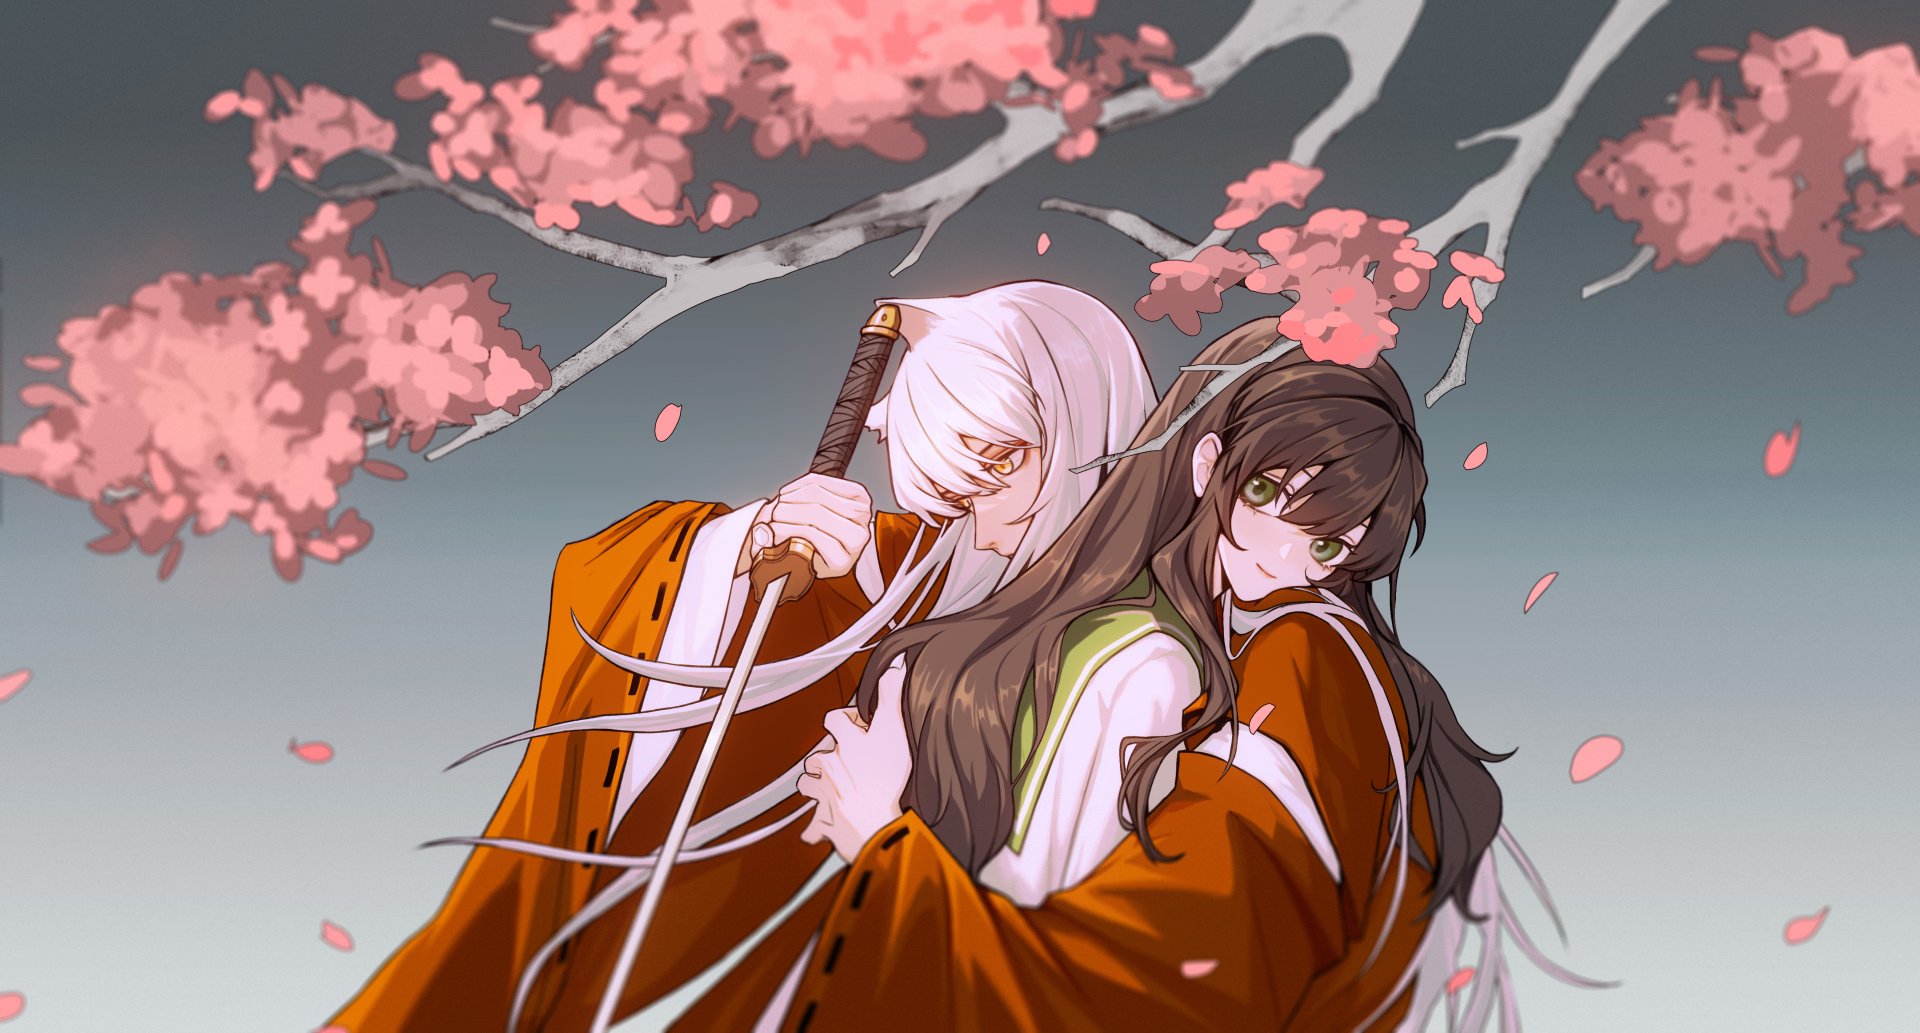 Inuyasha manga: Where to read, what to expect, and more